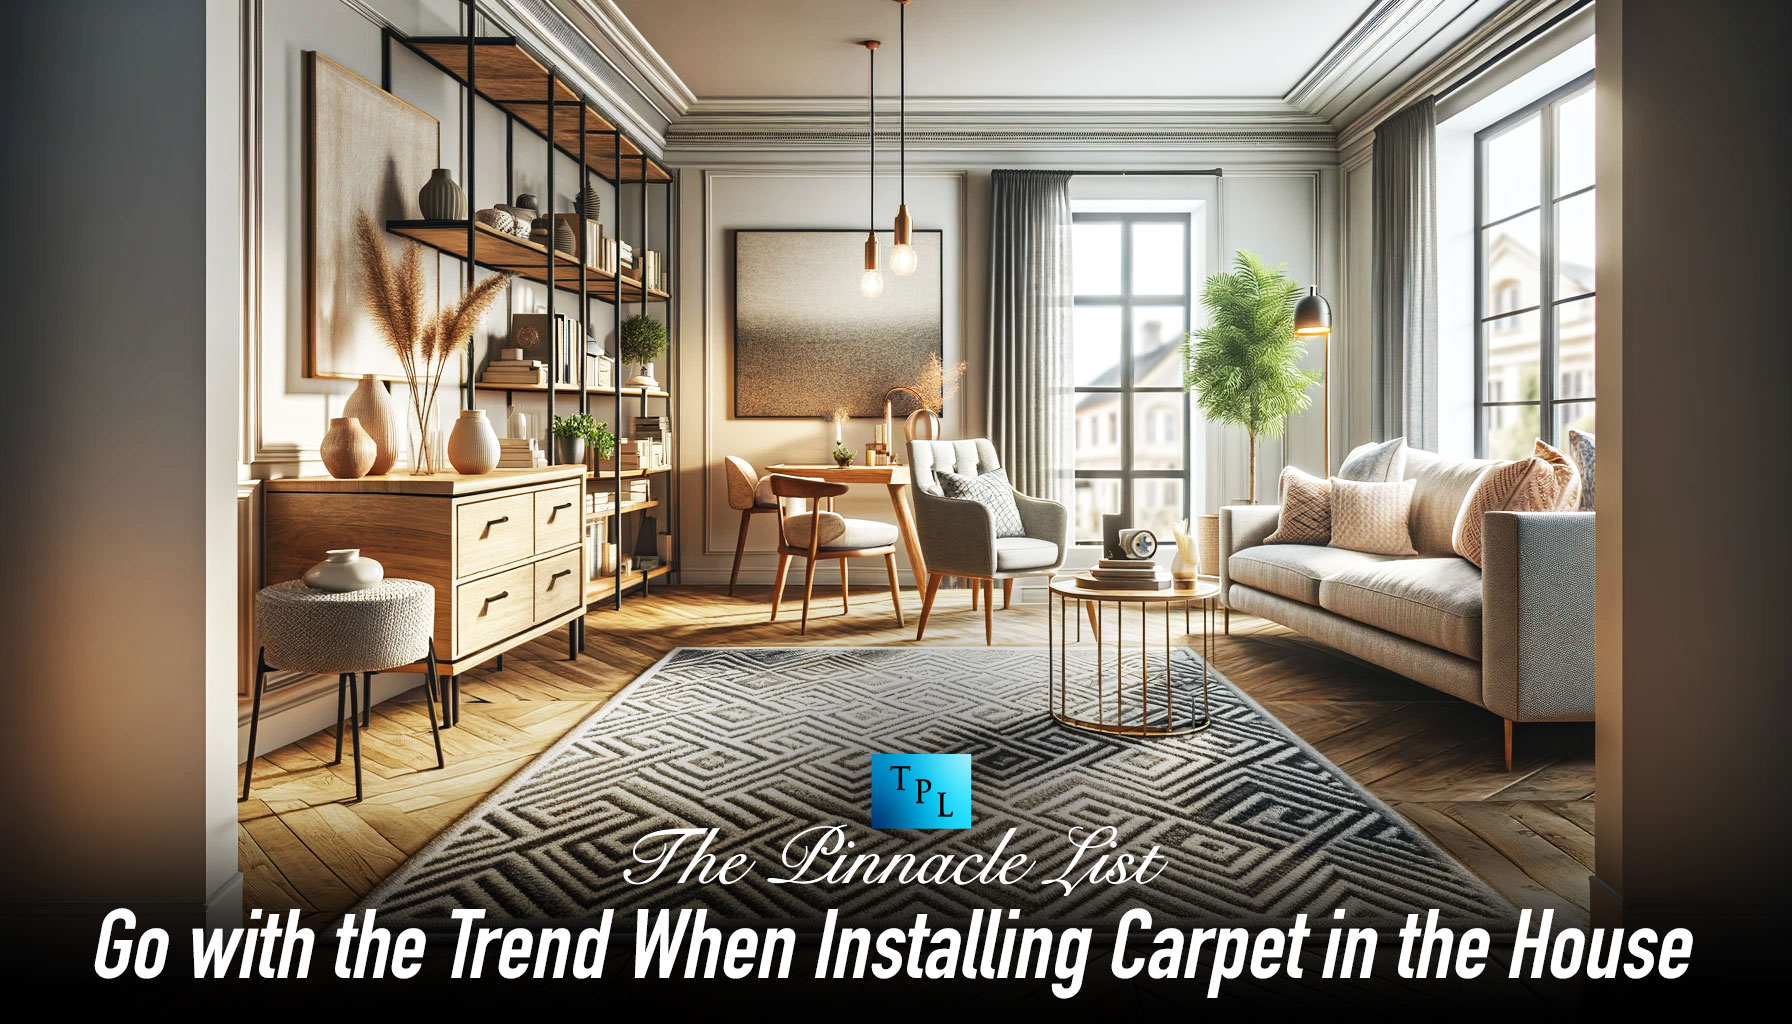 Go with the Trend When Installing Carpet in the House